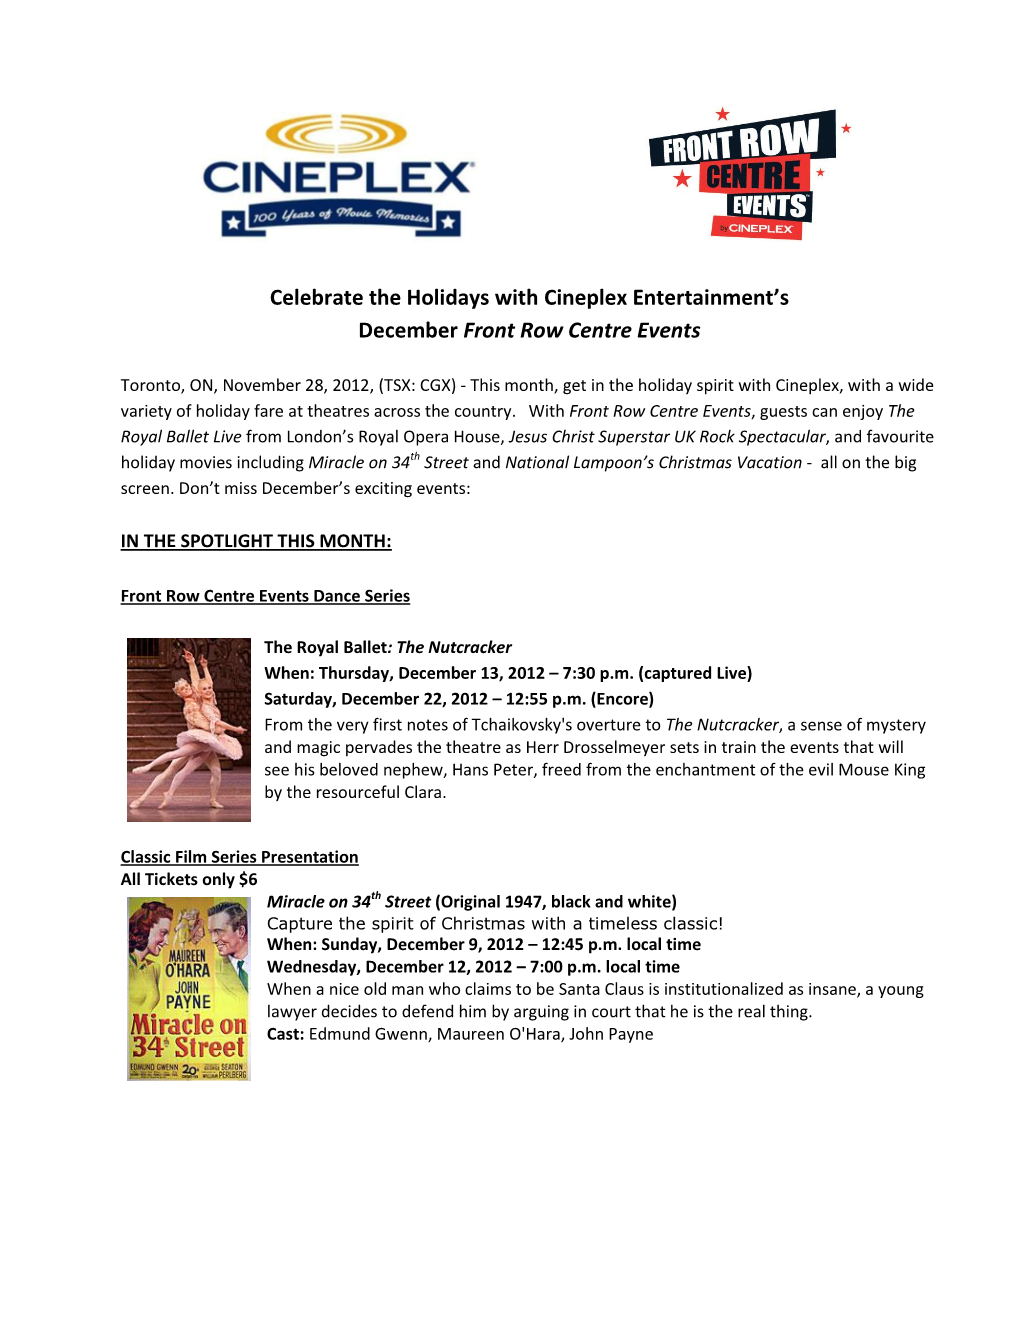 Celebrate the Holidays with Cineplex Entertainment's December Front